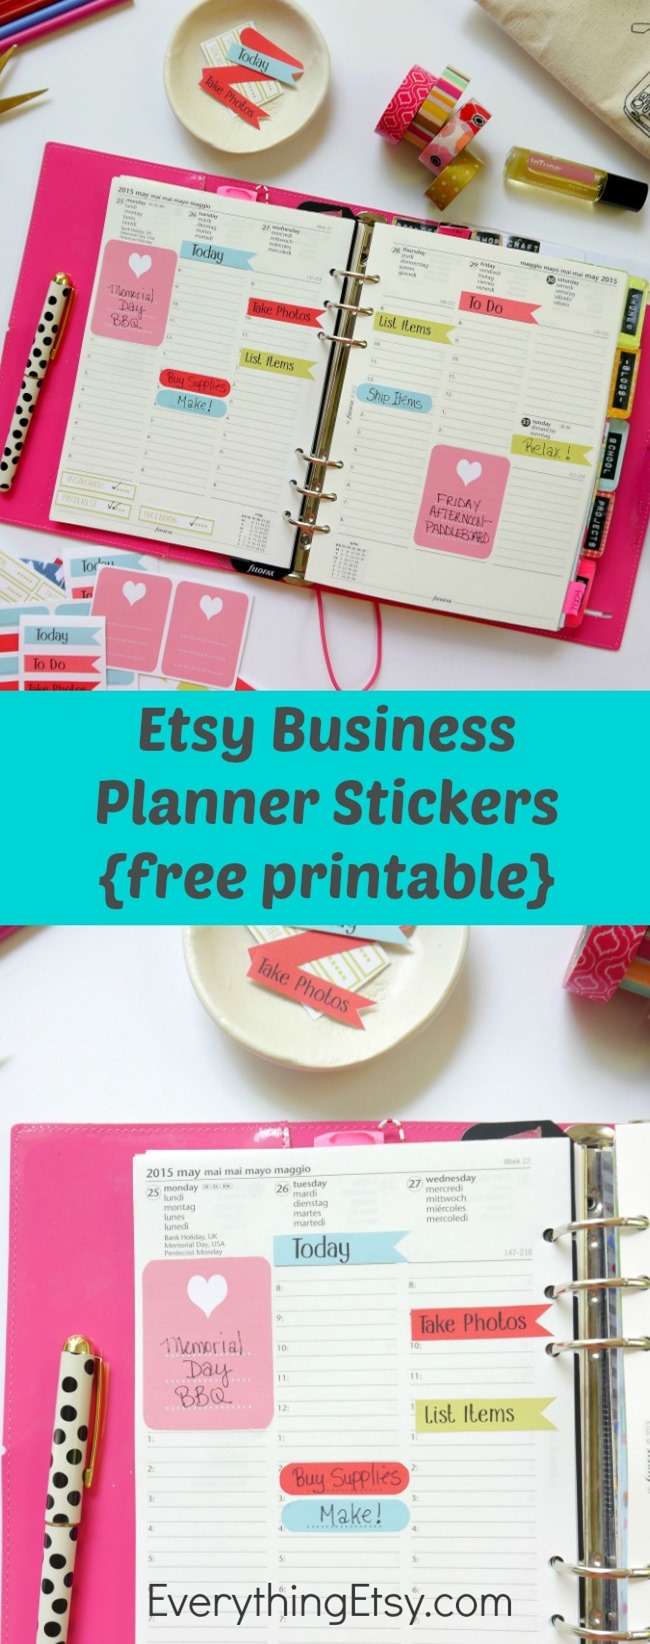 Etsy Business Planner Stickers - Free Printable for Filofax on EverythingEtsy.com